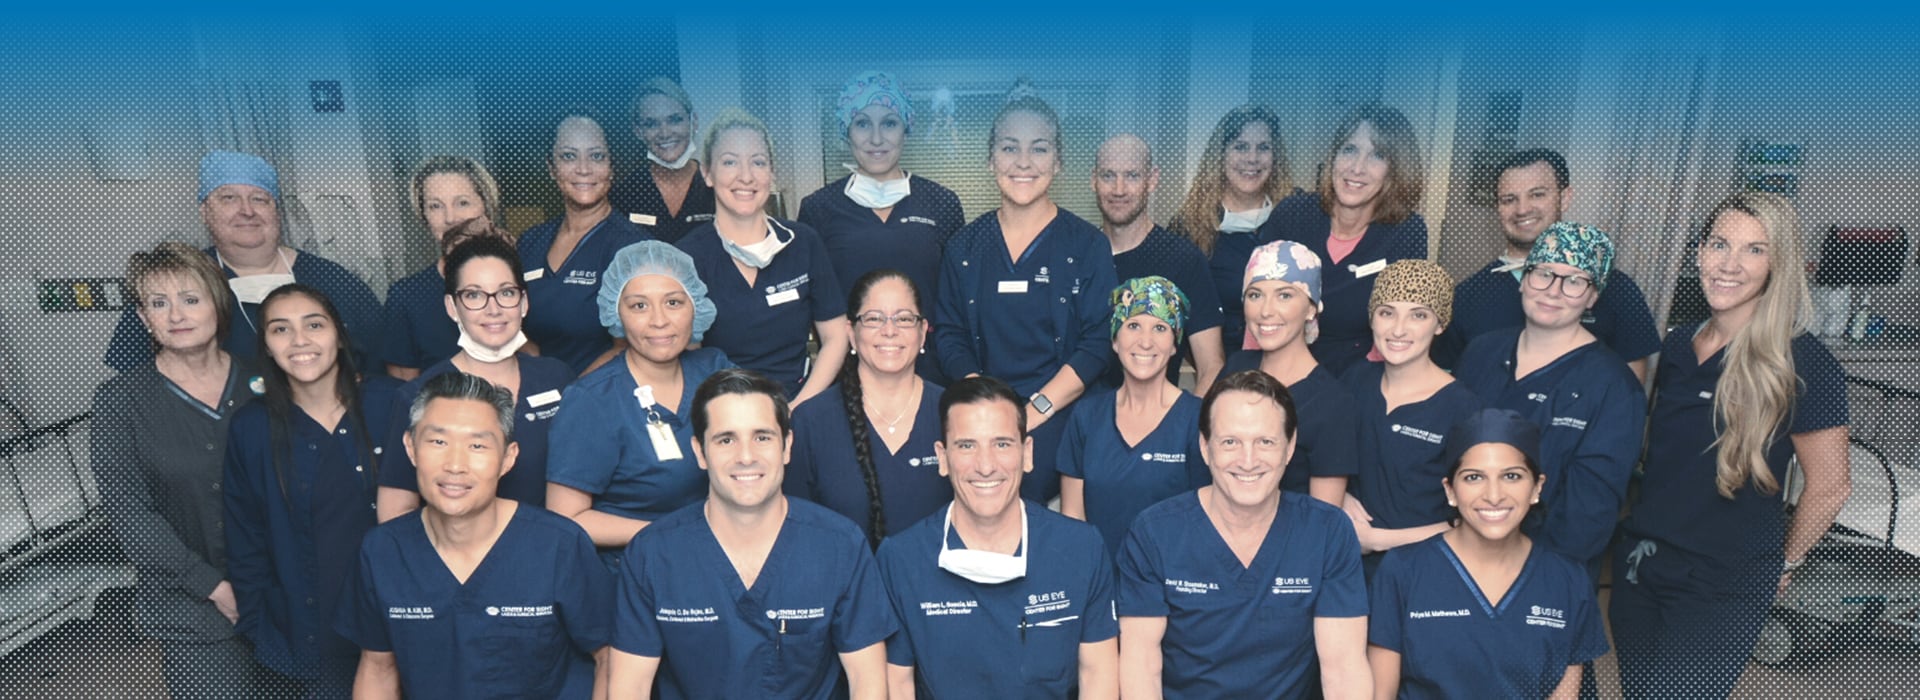 A group of US Eye (Ophthalmology associates in VA) team members posing for a photo